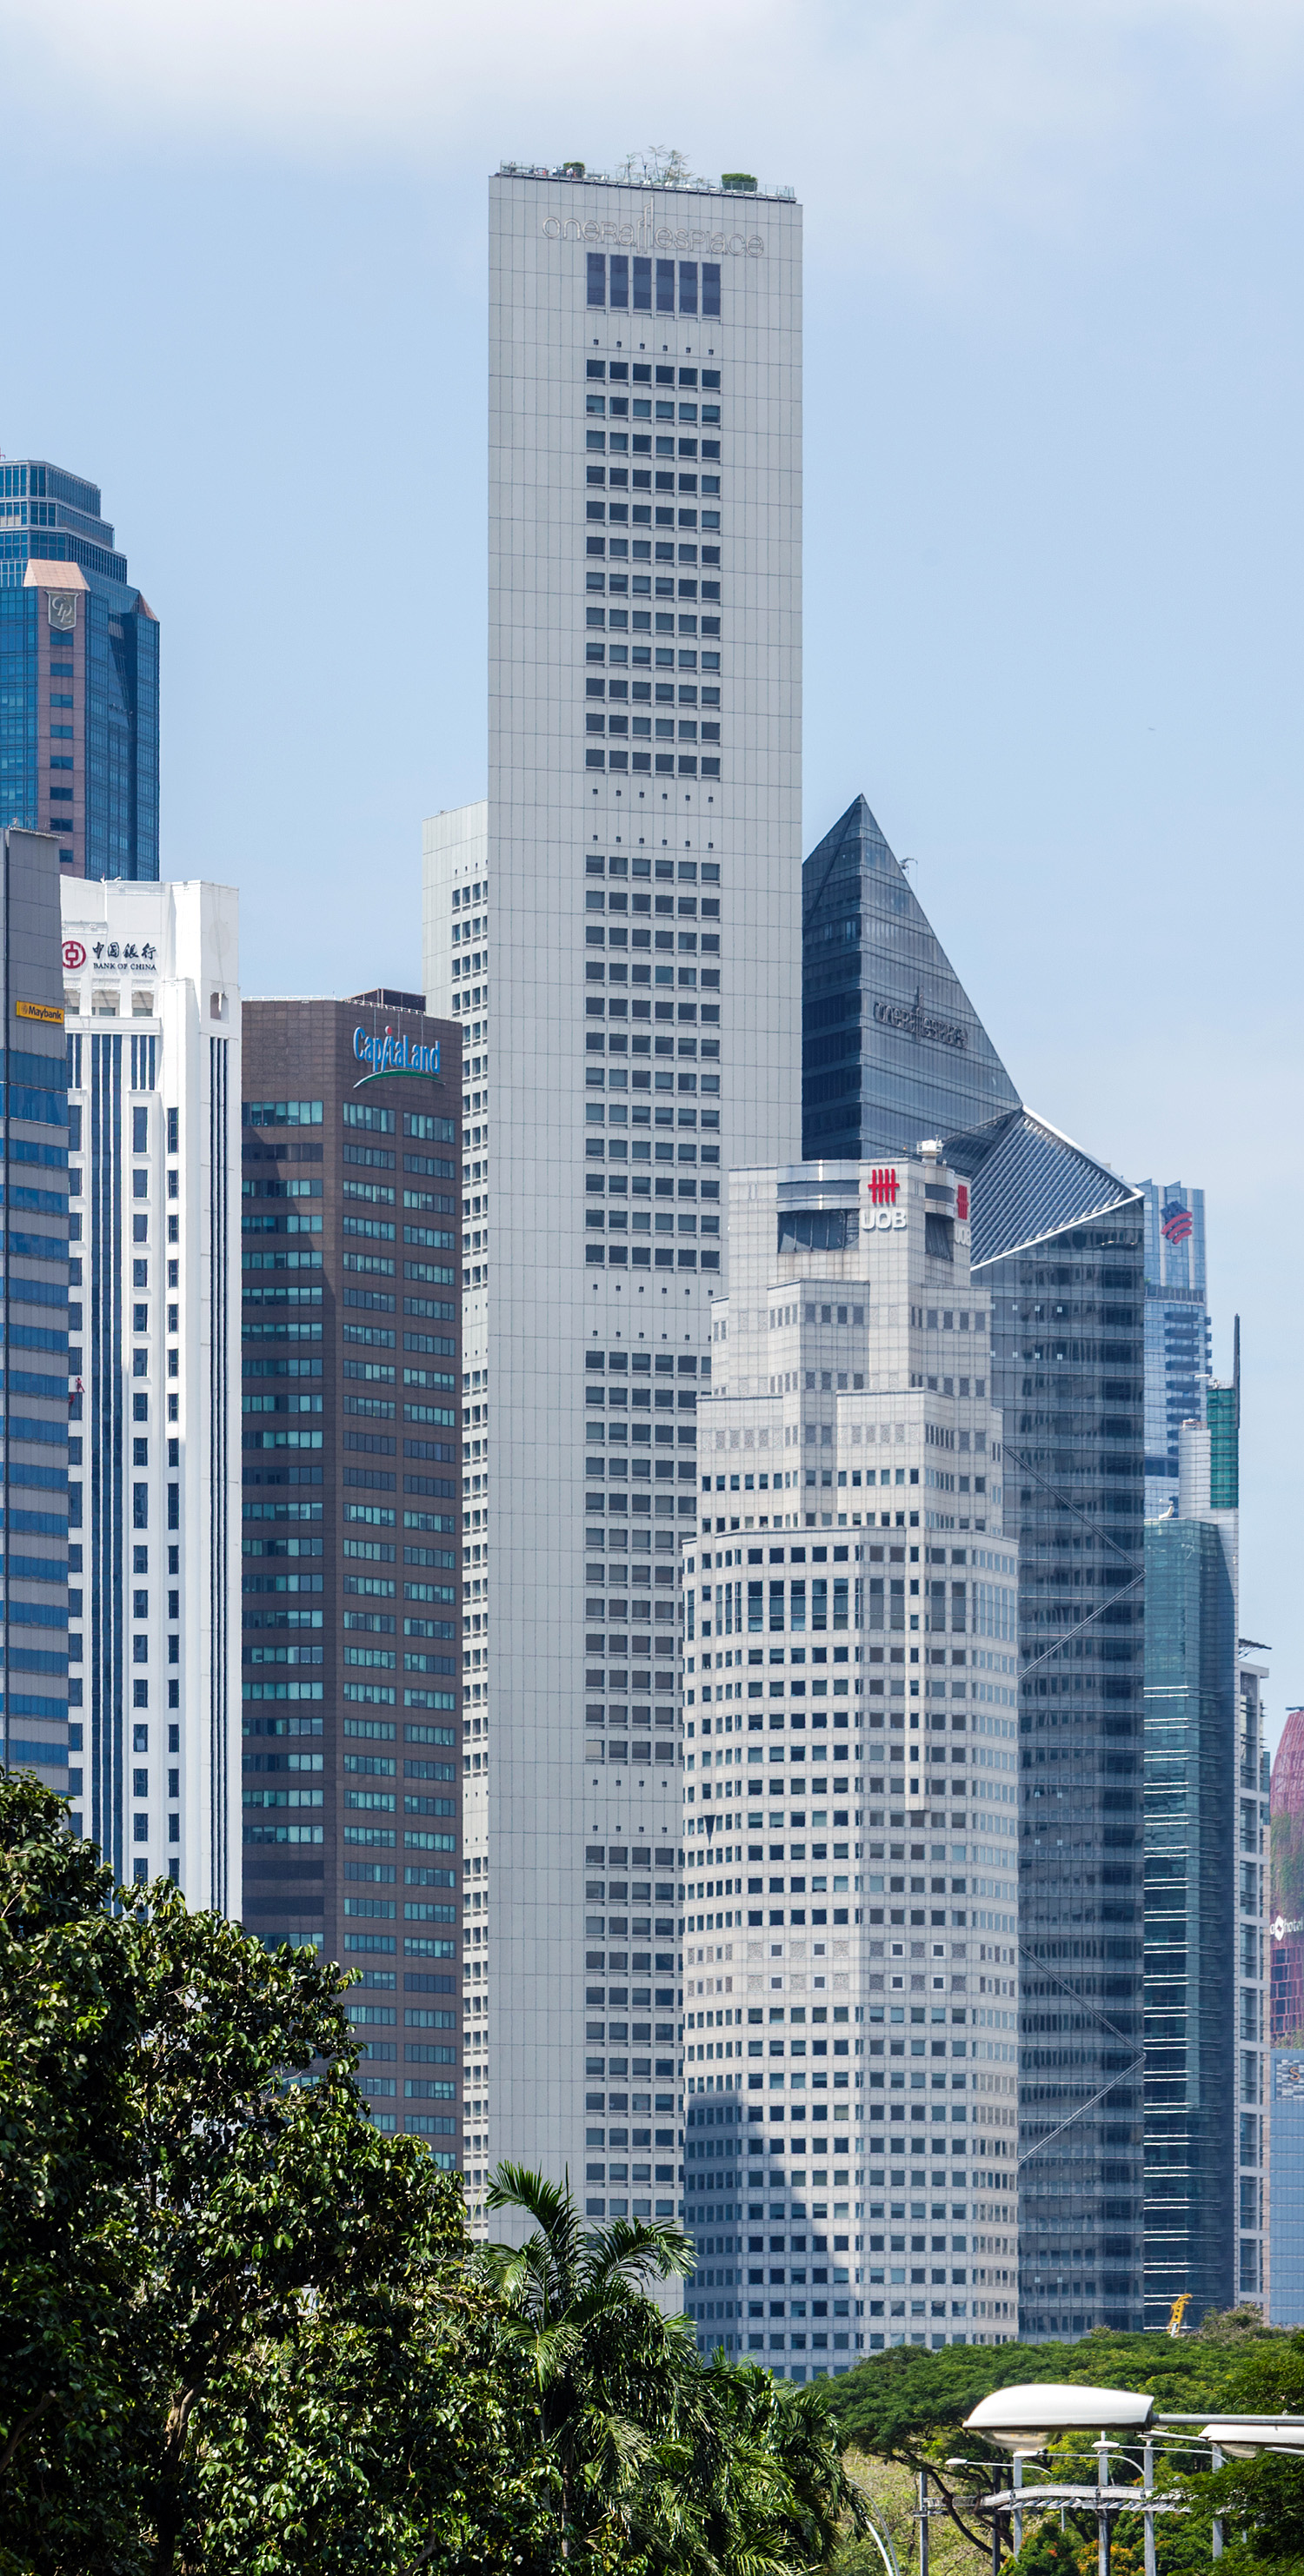 Overseas Union Bank Centre, Singapore - View from the northest. © Mathias Beinling